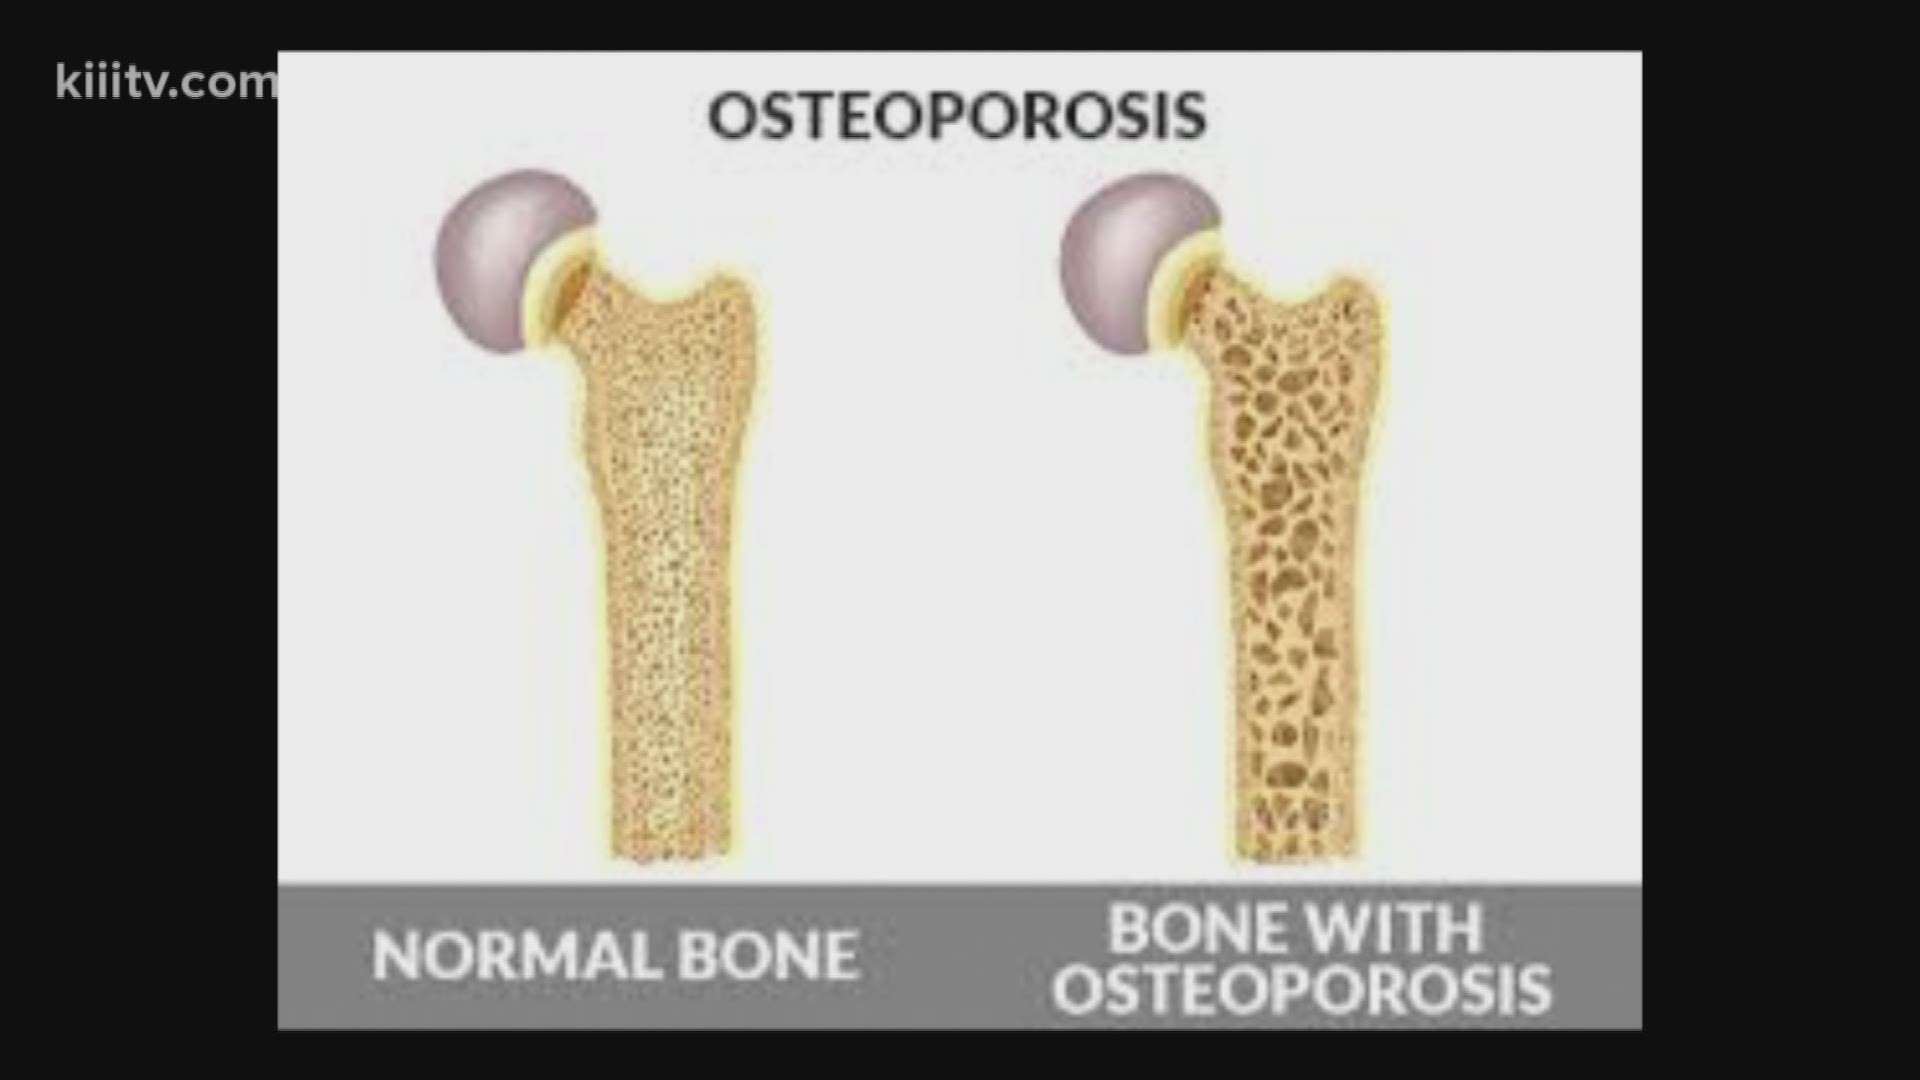 What is Osteoporosis and how it affect women more than men.